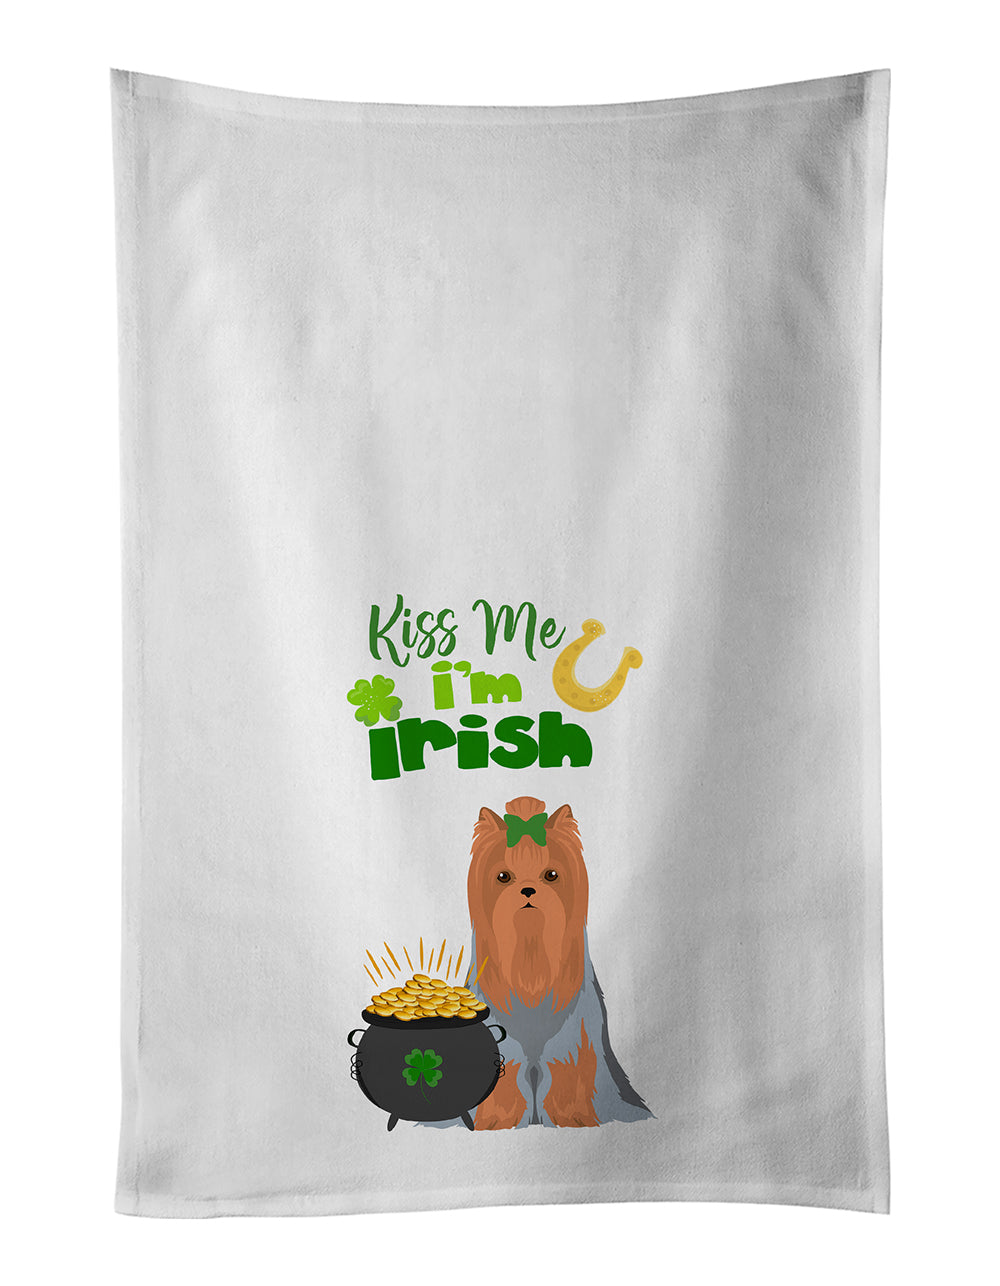 Buy this Blue and Tan Full Coat Yorkshire Terrier St. Patrick's Day White Kitchen Towel Set of 2 Dish Towels